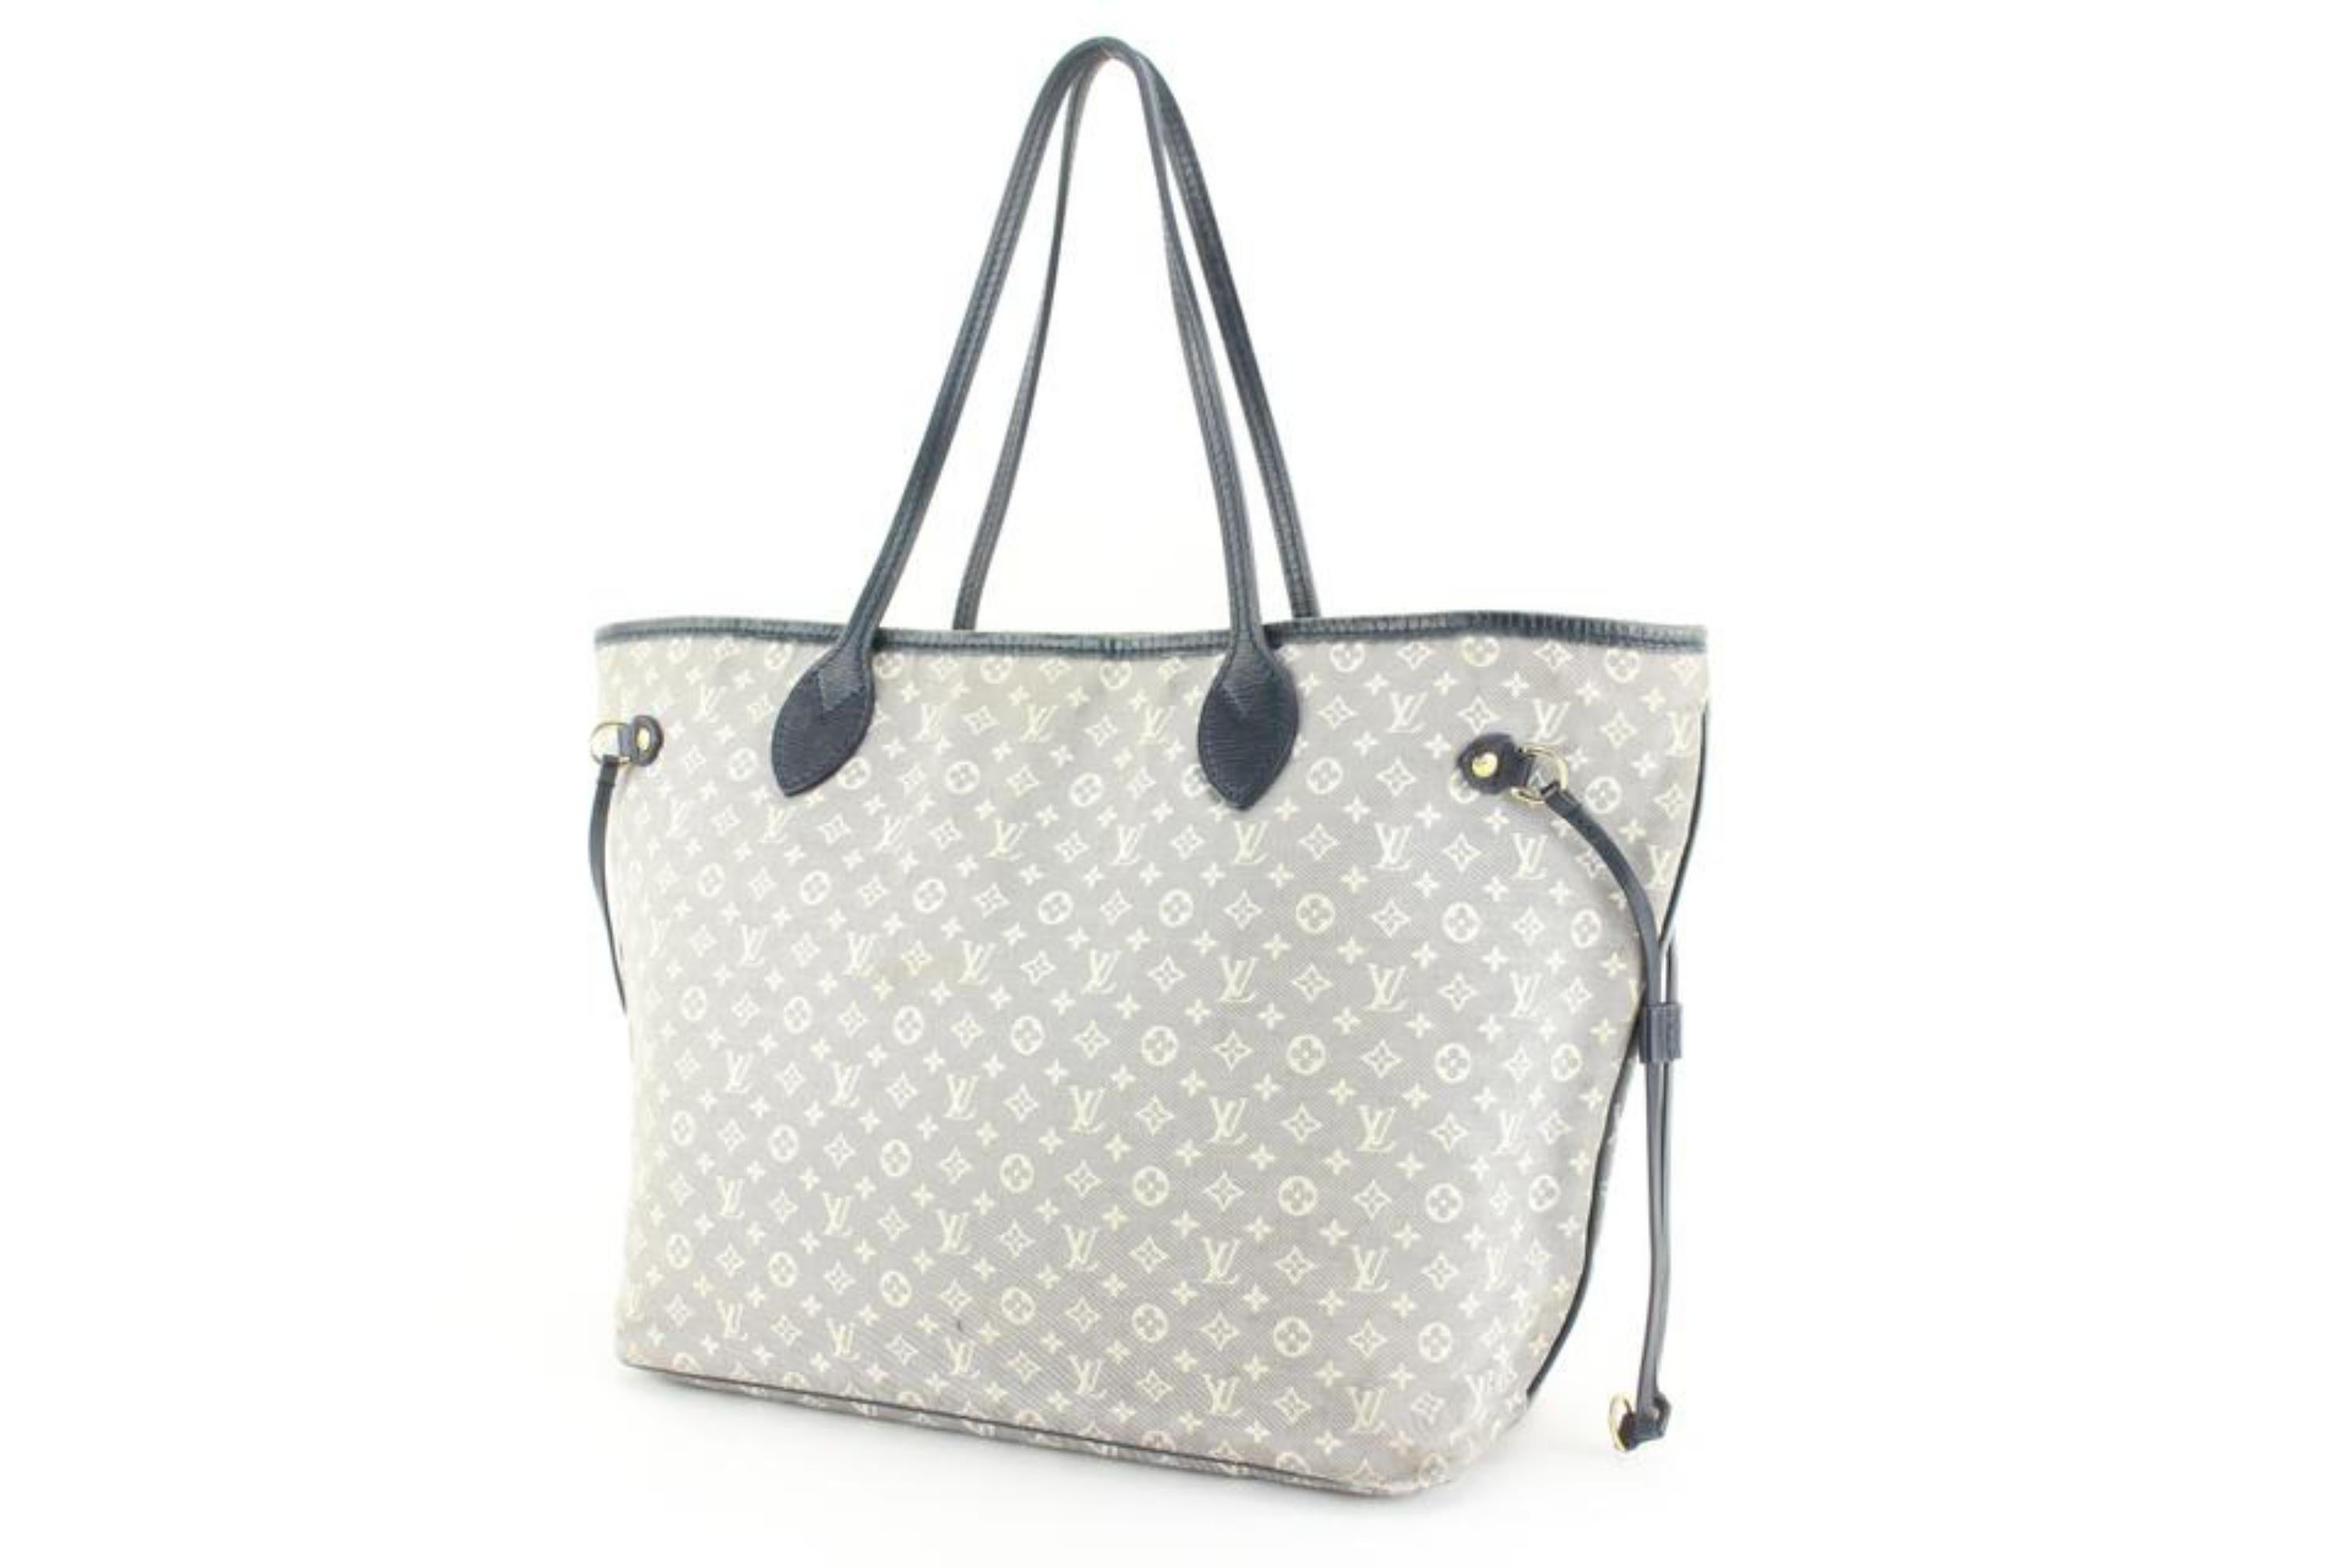 Louis Vuitton Grey x Navy Neverfull MM Tote Bag 19lz69s 4